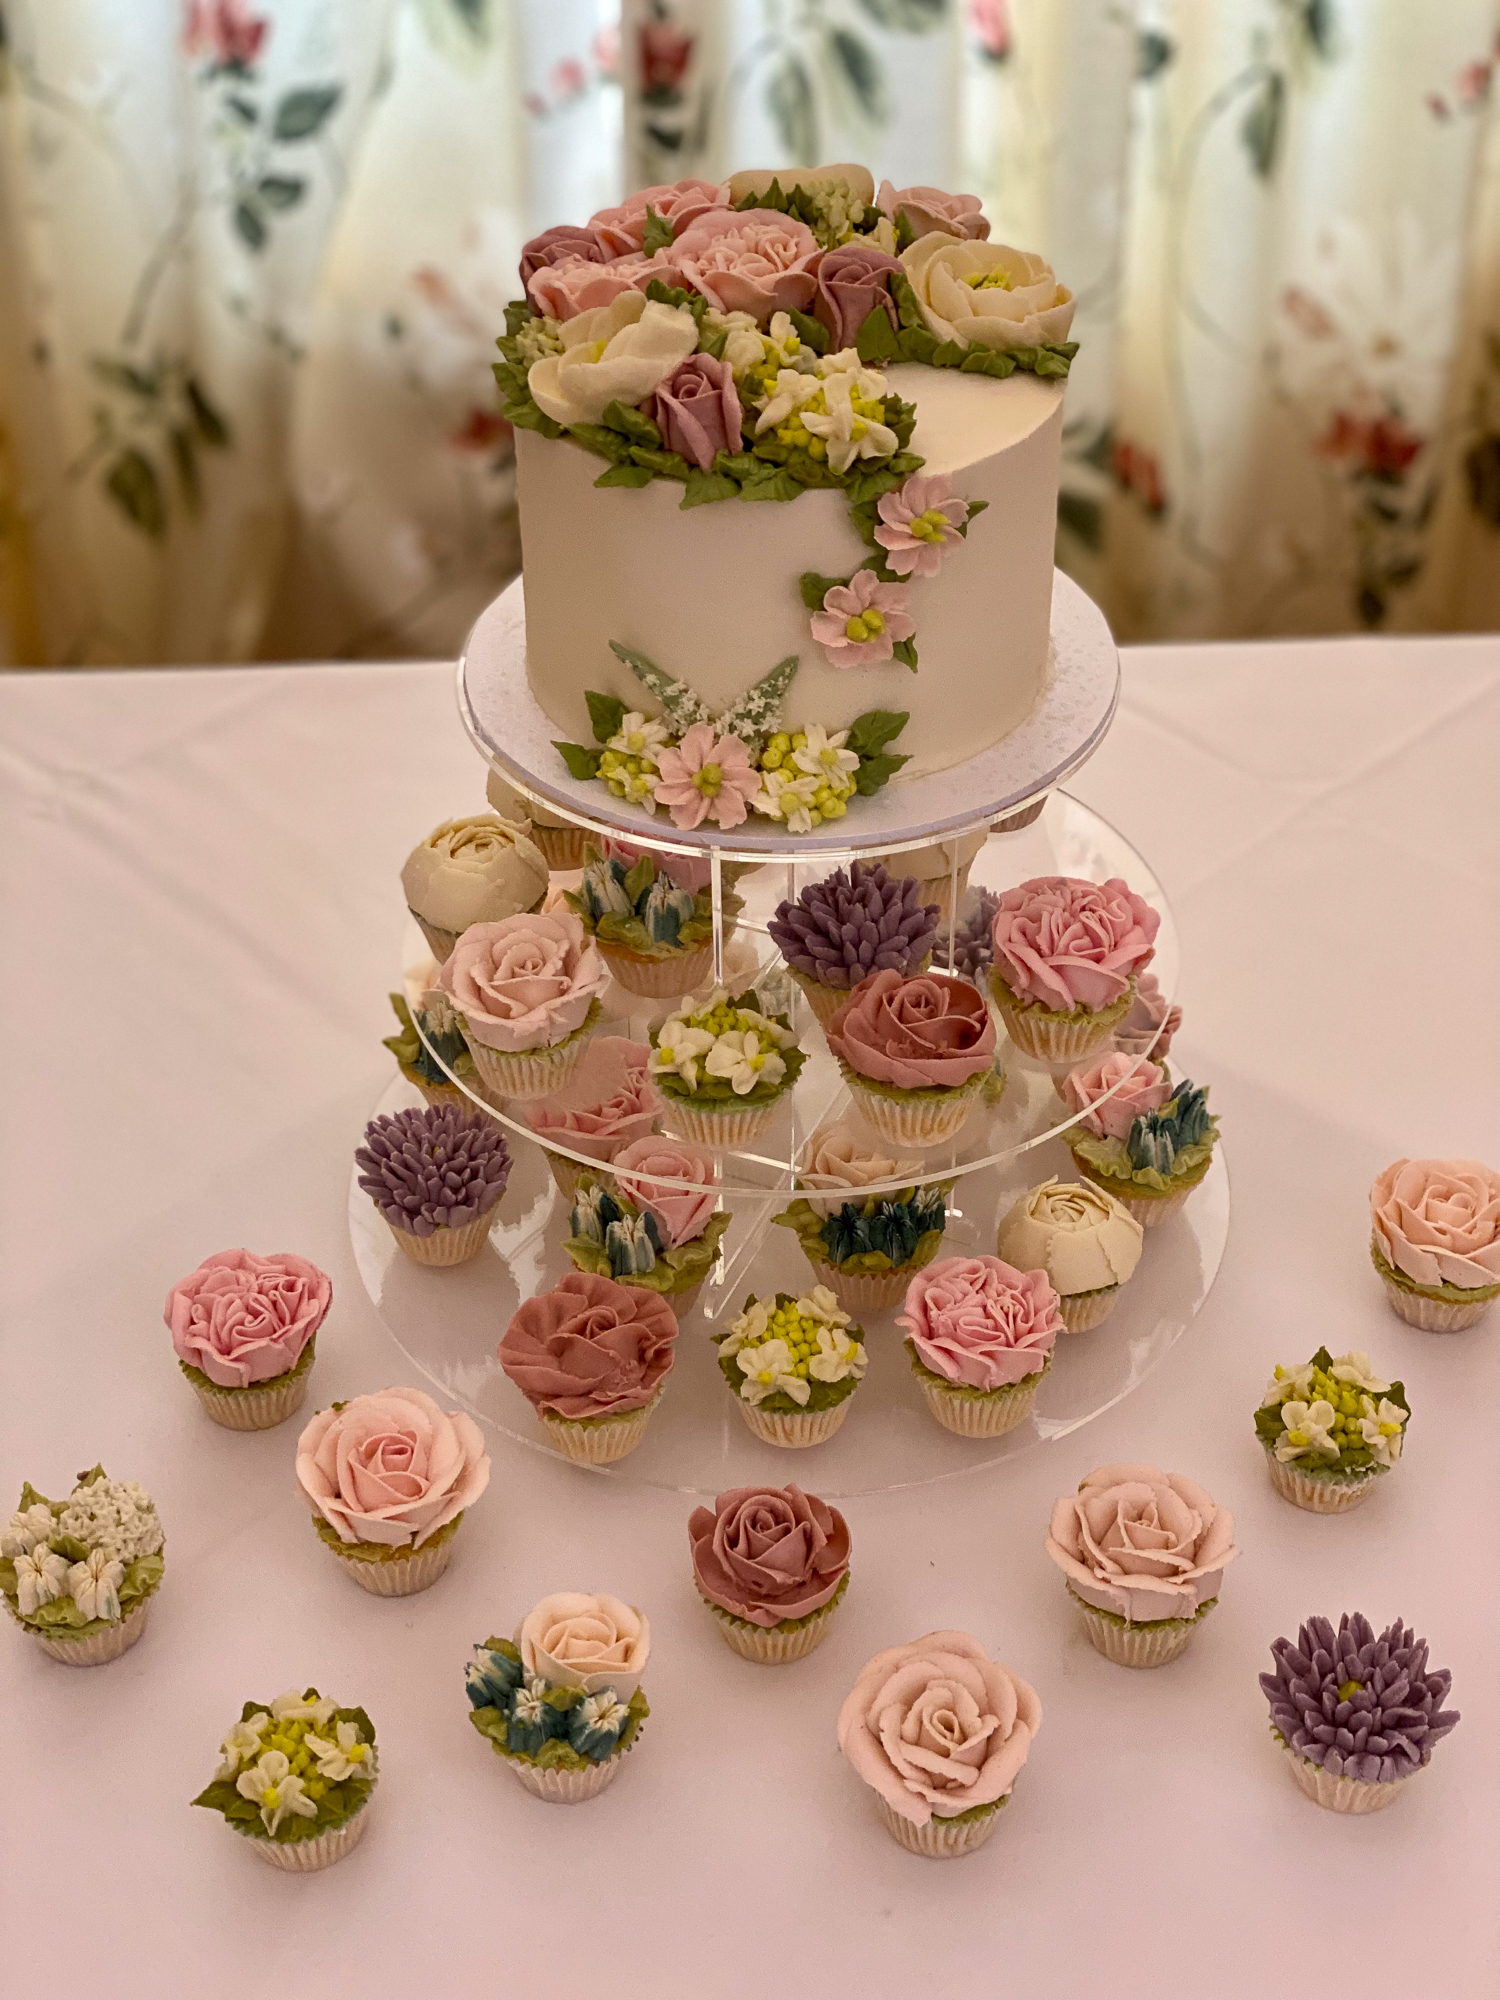 Floral Wedding Cake by Cakes by the Bunch in Abingdon Oxfordshire